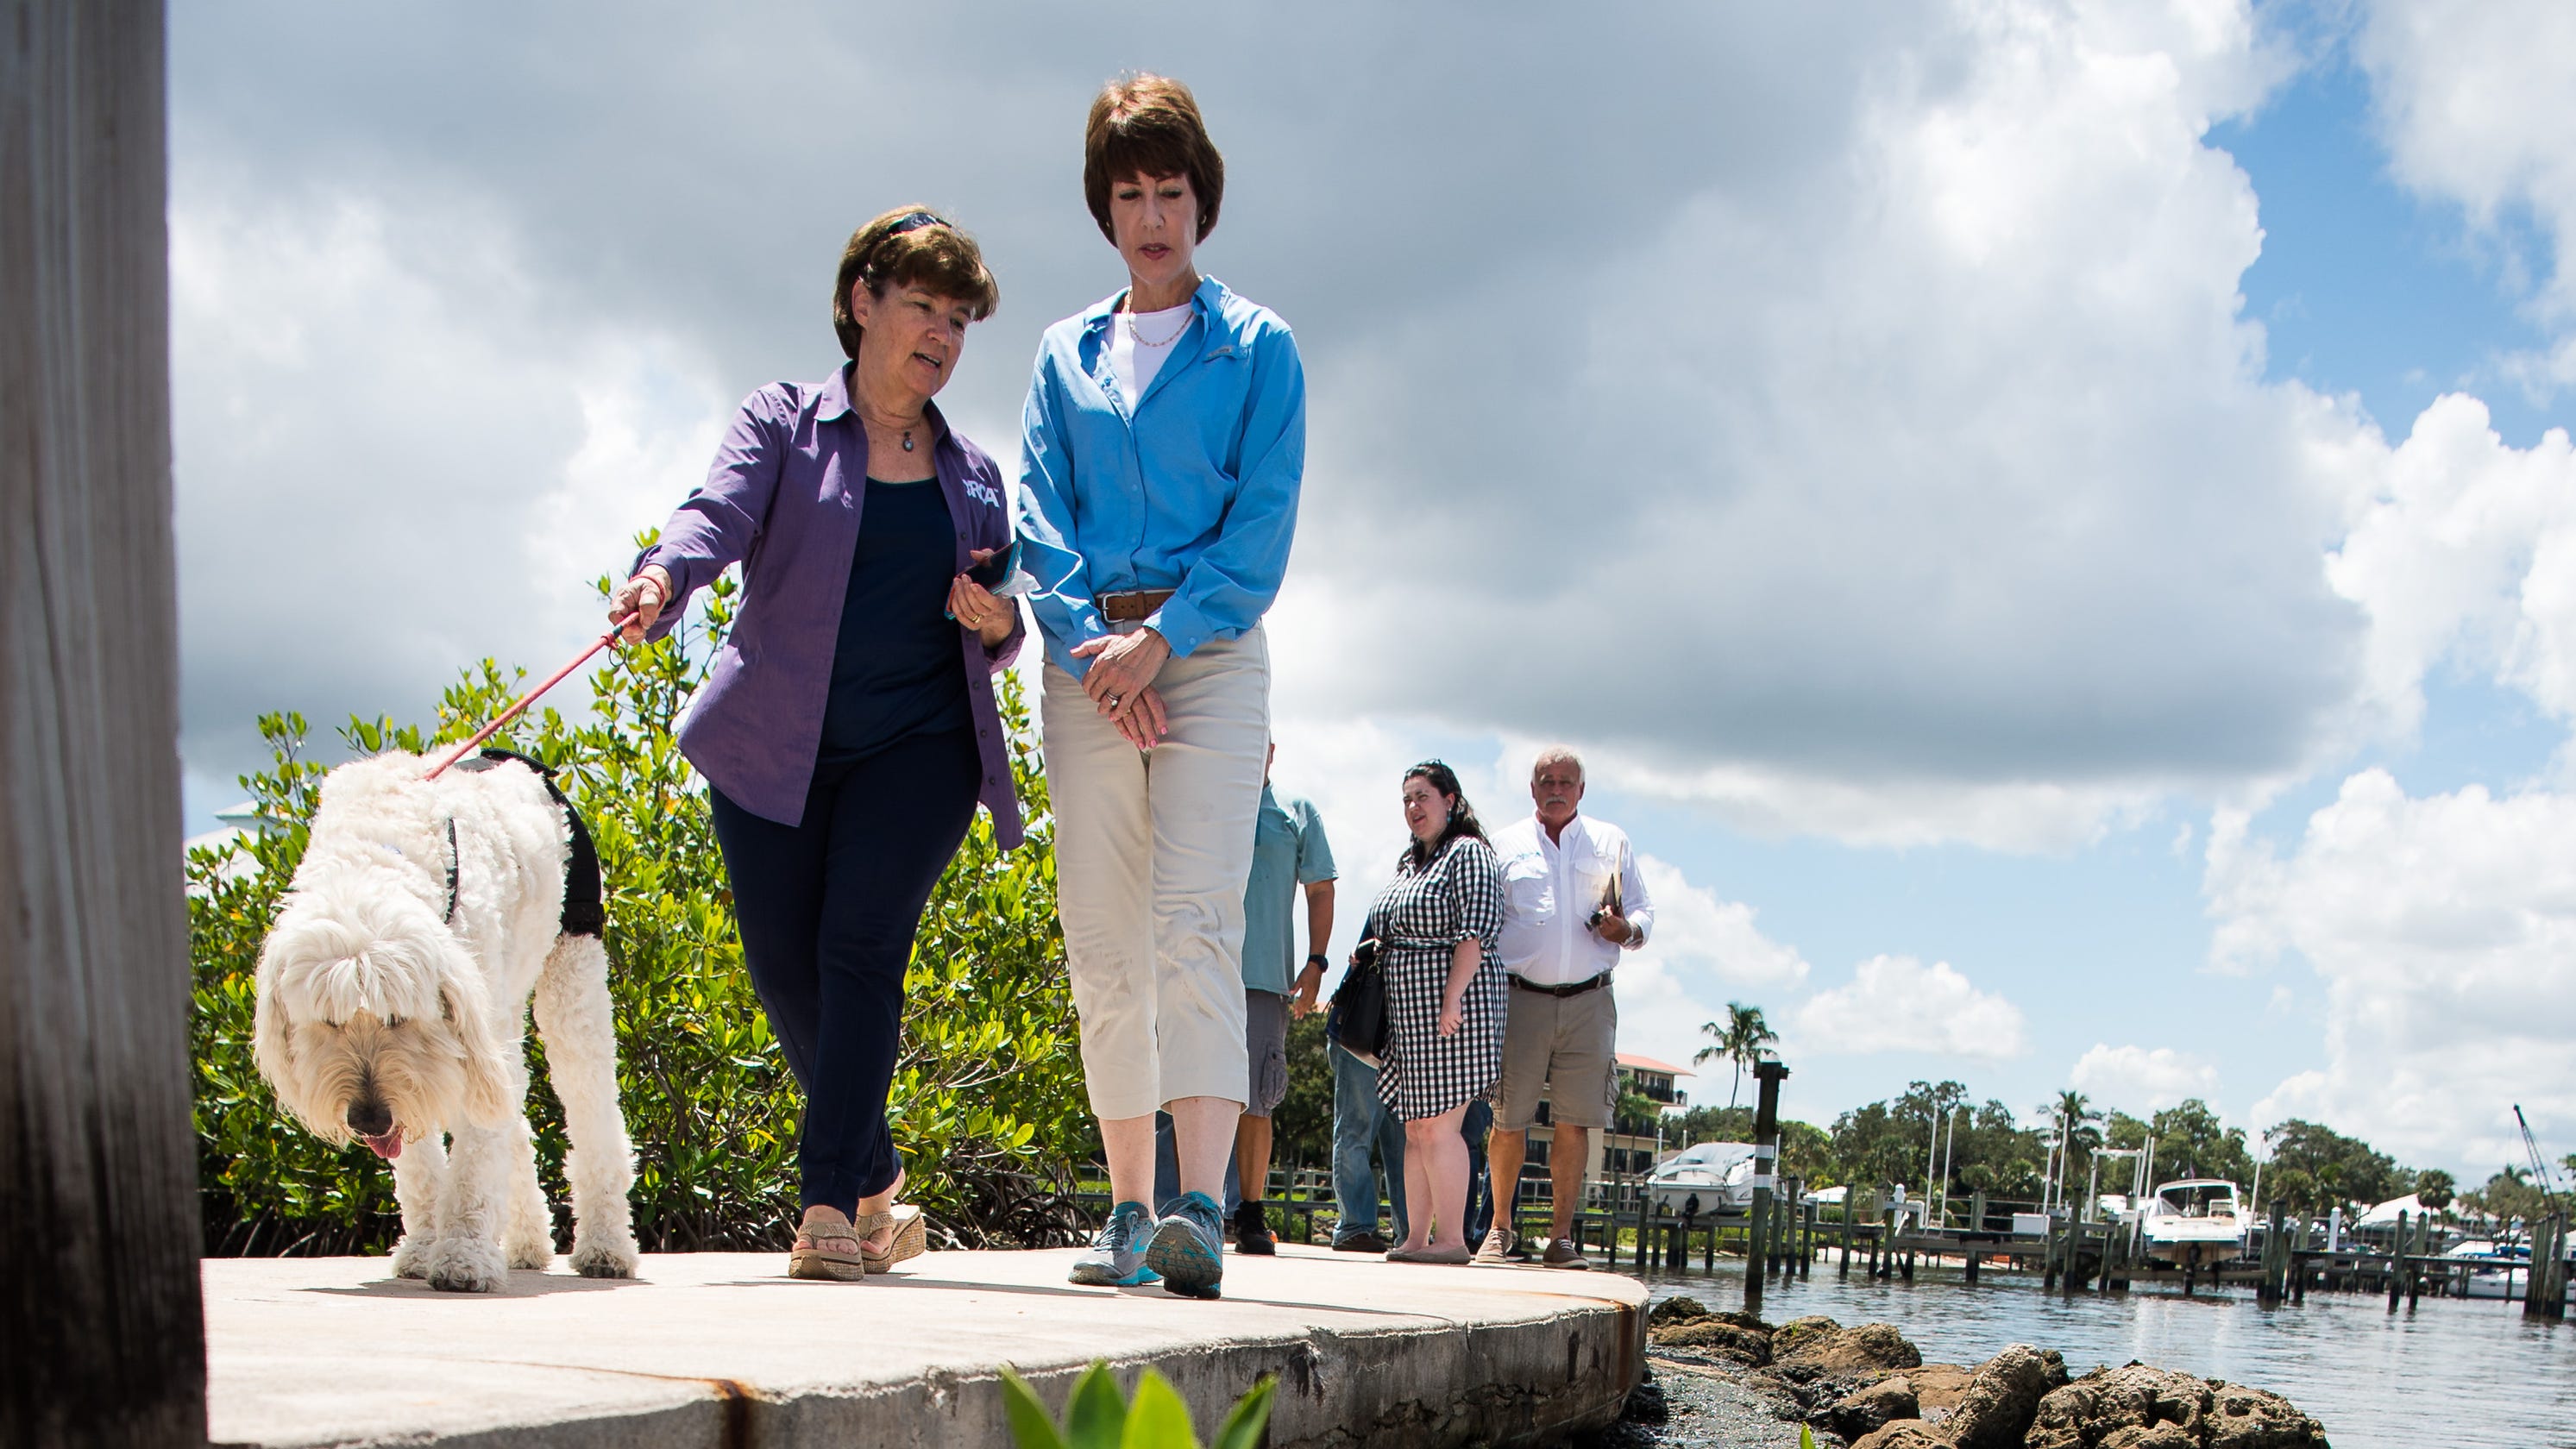 Indian River Lagoon topic of panel with ORCA head Edie Widder, Friends of Everglades, TCPalm - TCPalm